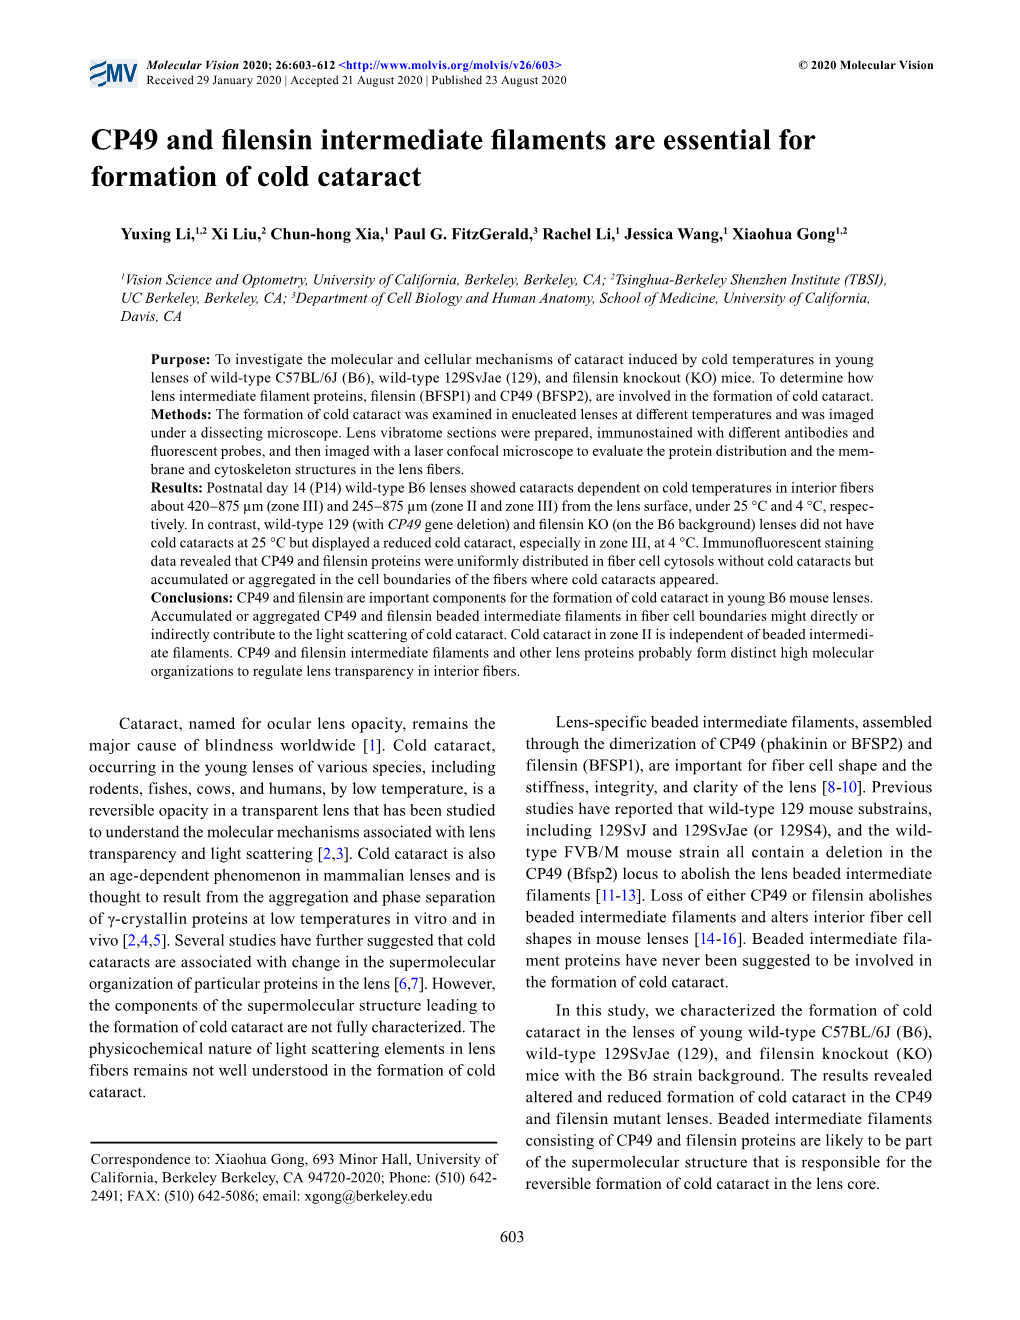 CP49 and Filensin Intermediate Filaments Are Essential for Formation of Cold Cataract